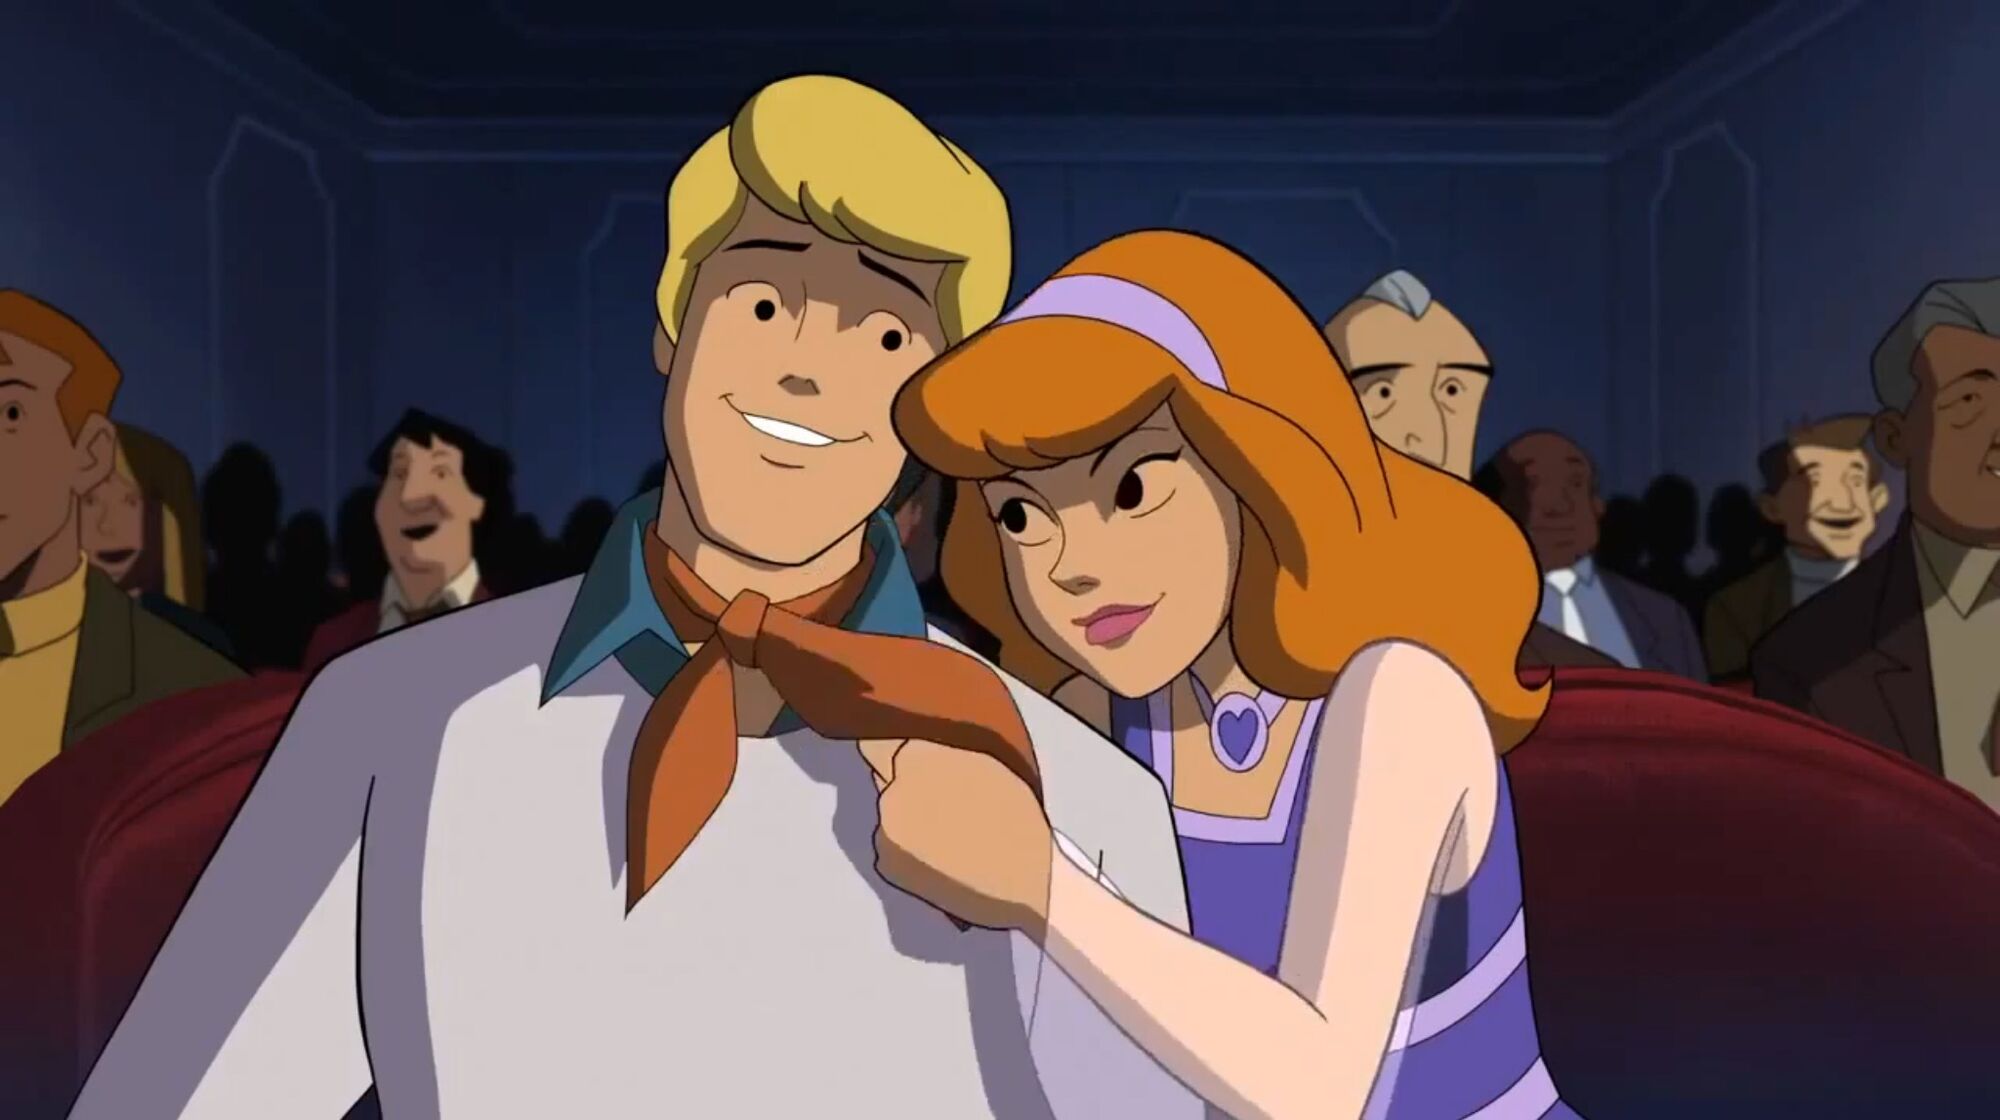 Image Fred And Daphne Scooby Doo Abracadabra Doo Love Interest